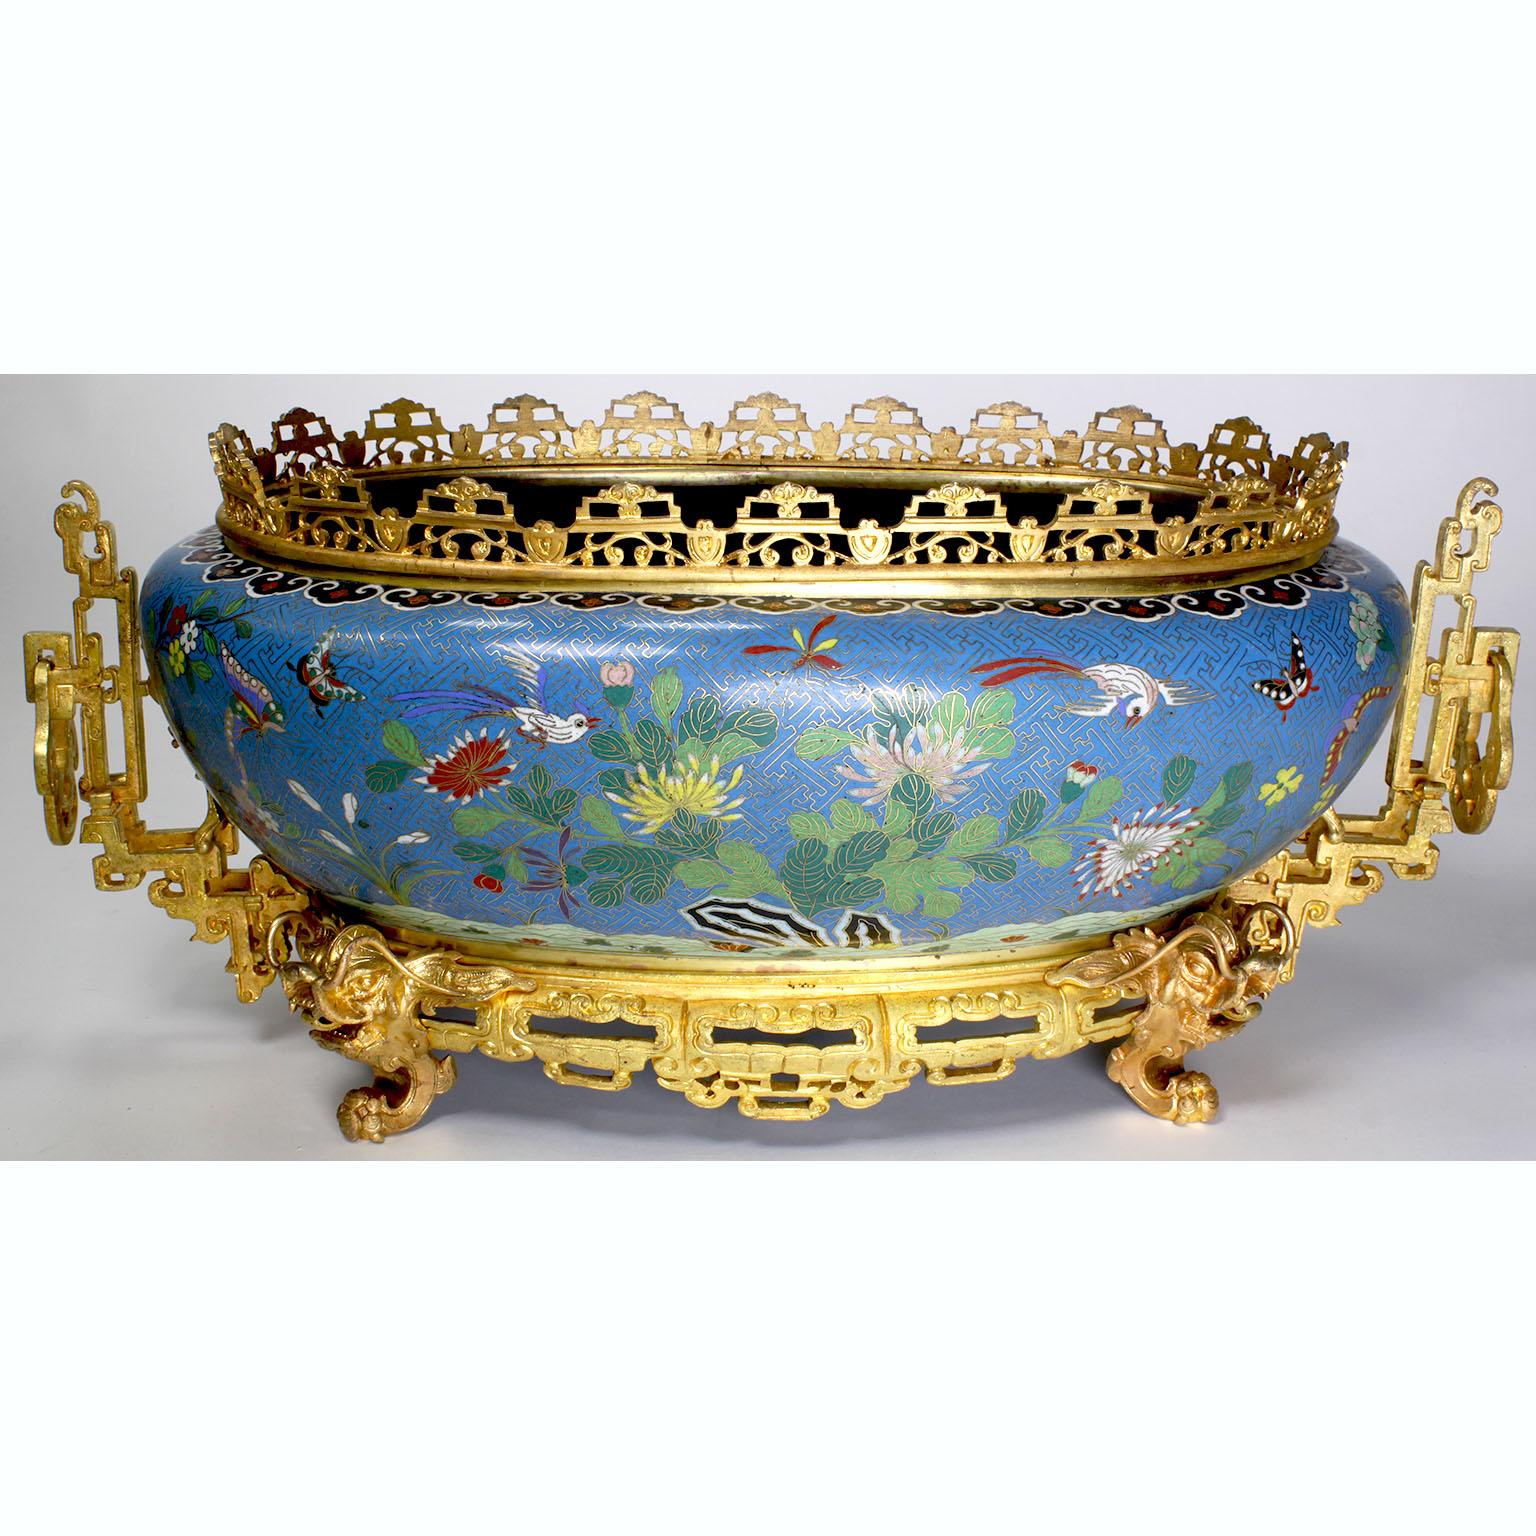 Chinese Export Chinese 19th-20th Century Gilt Bronze Mounted Cloisonné Jardinière 'Planter' For Sale